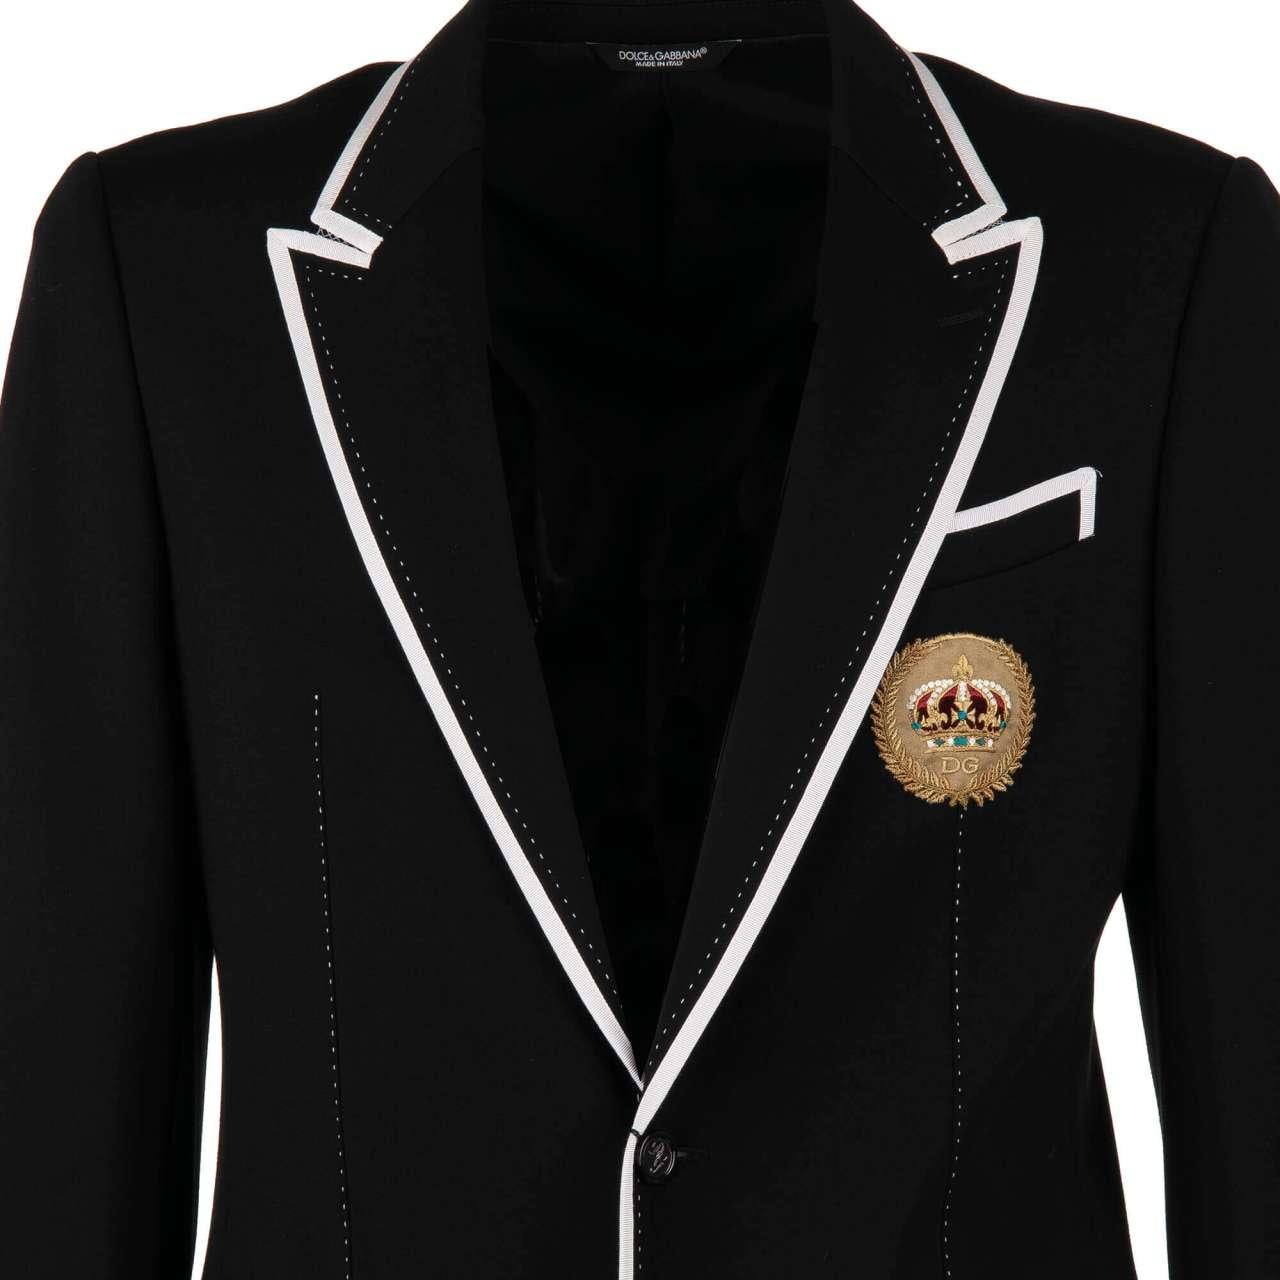 - Jersey Fabric blazer with DG crown embroidery and contrast applications in white and black by DOLCE & GABBANA - Former RRP: EUR 1.650 - MADE IN ITALY - New with Tag - Slim Fit - Model: G2LV7Z-FUGHW-N0000 - Material: 65% Viscose, 35% Nylon, 5%